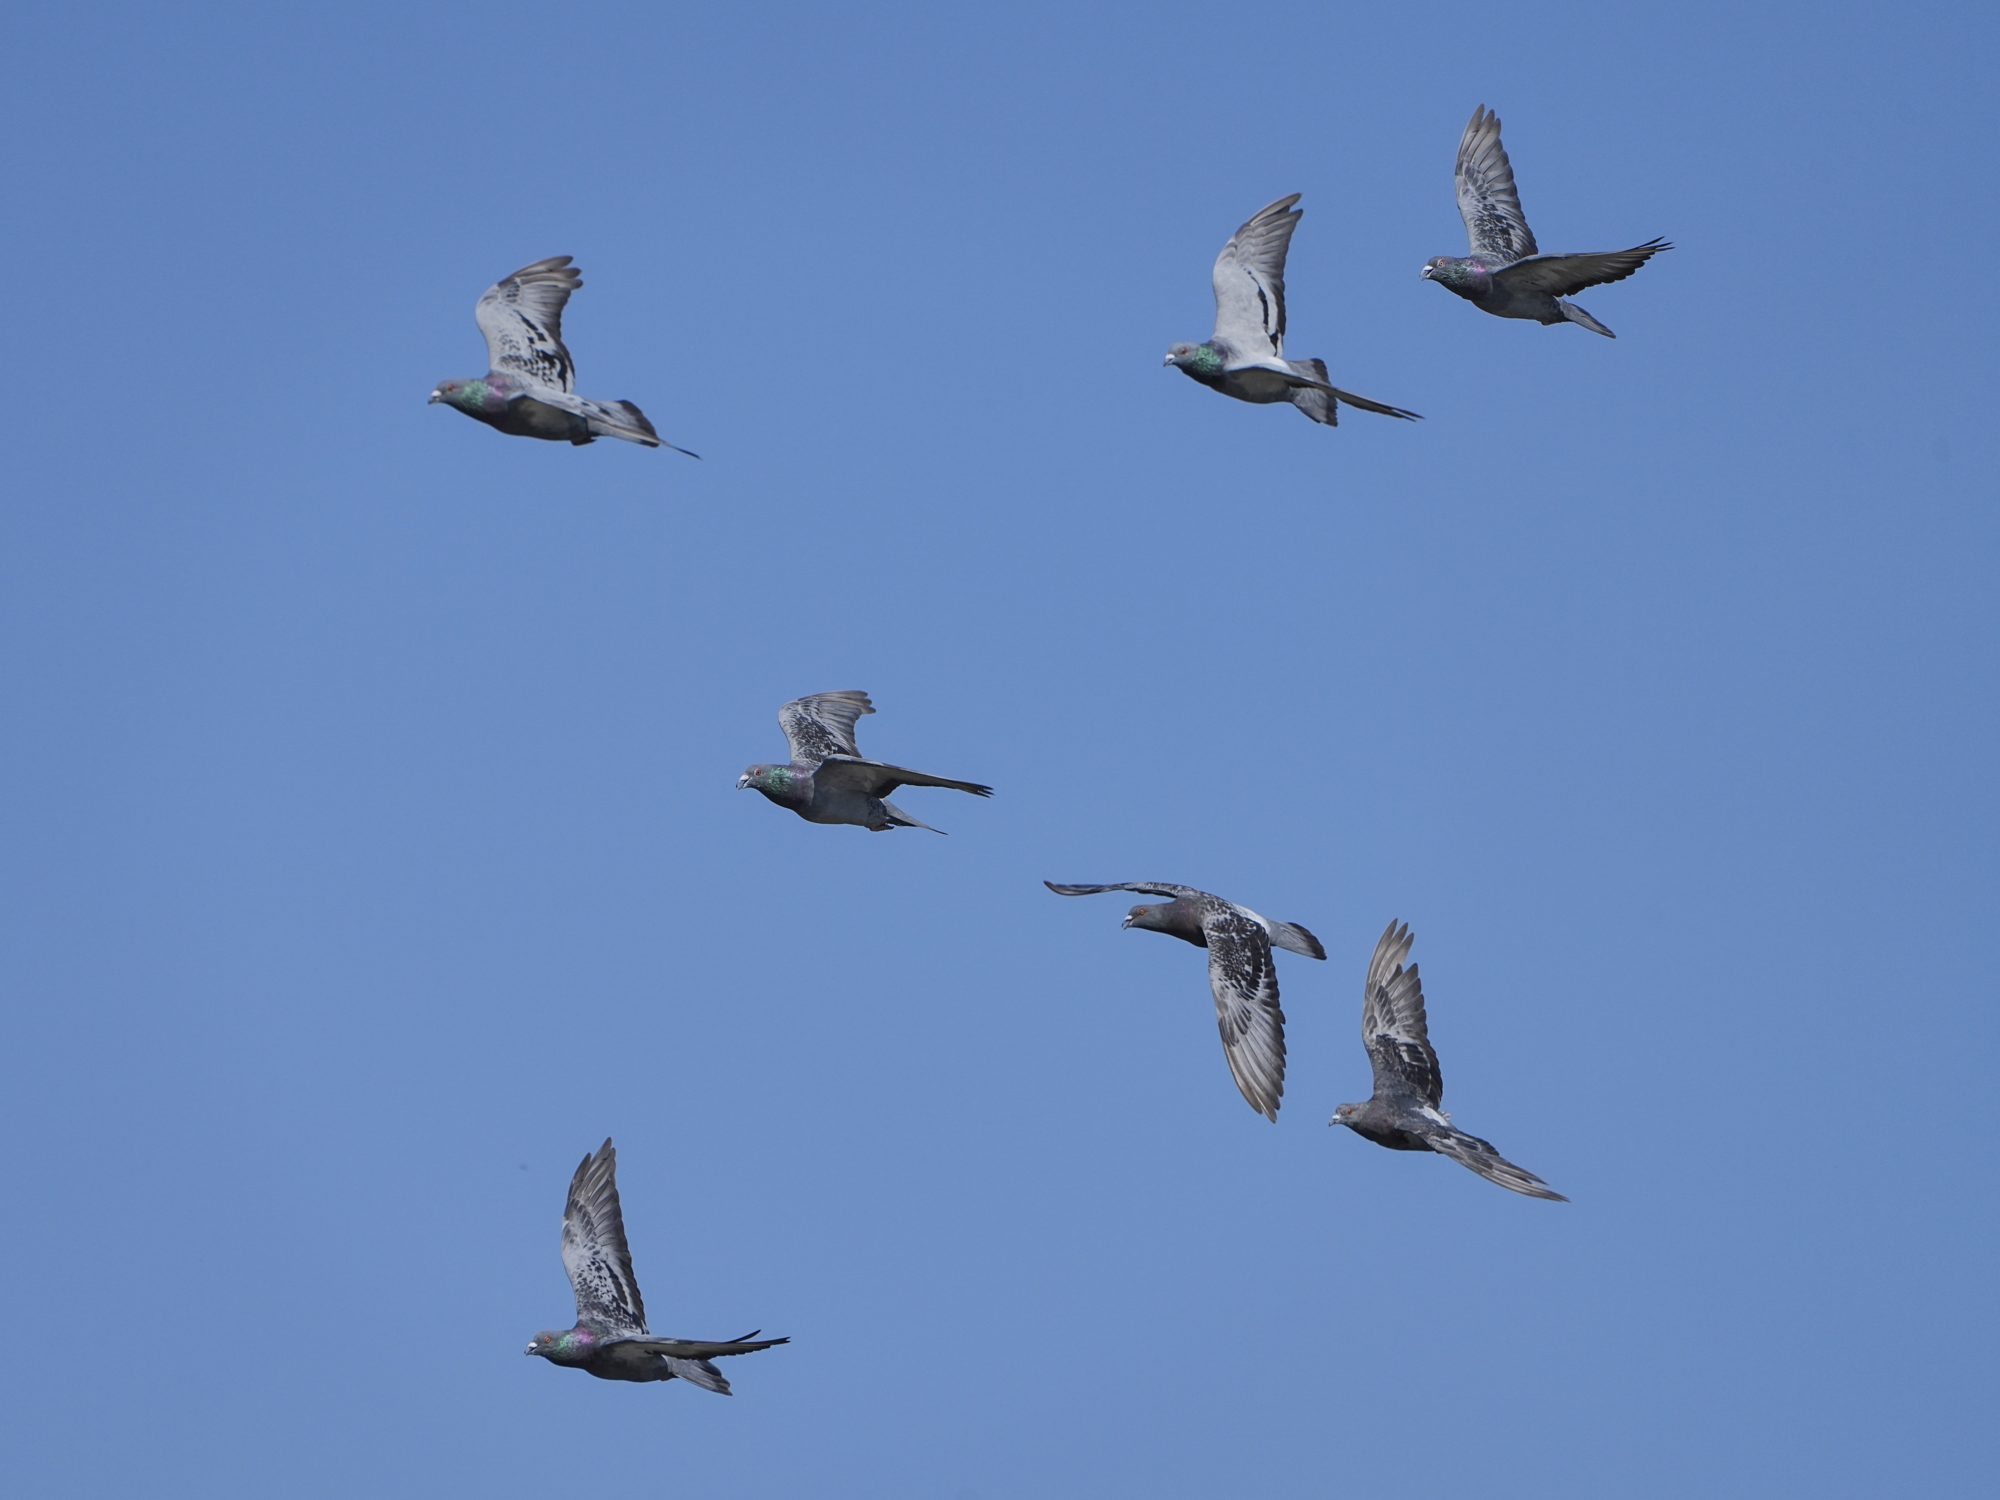 A number of Rock Pigeons in flight against a blue sky